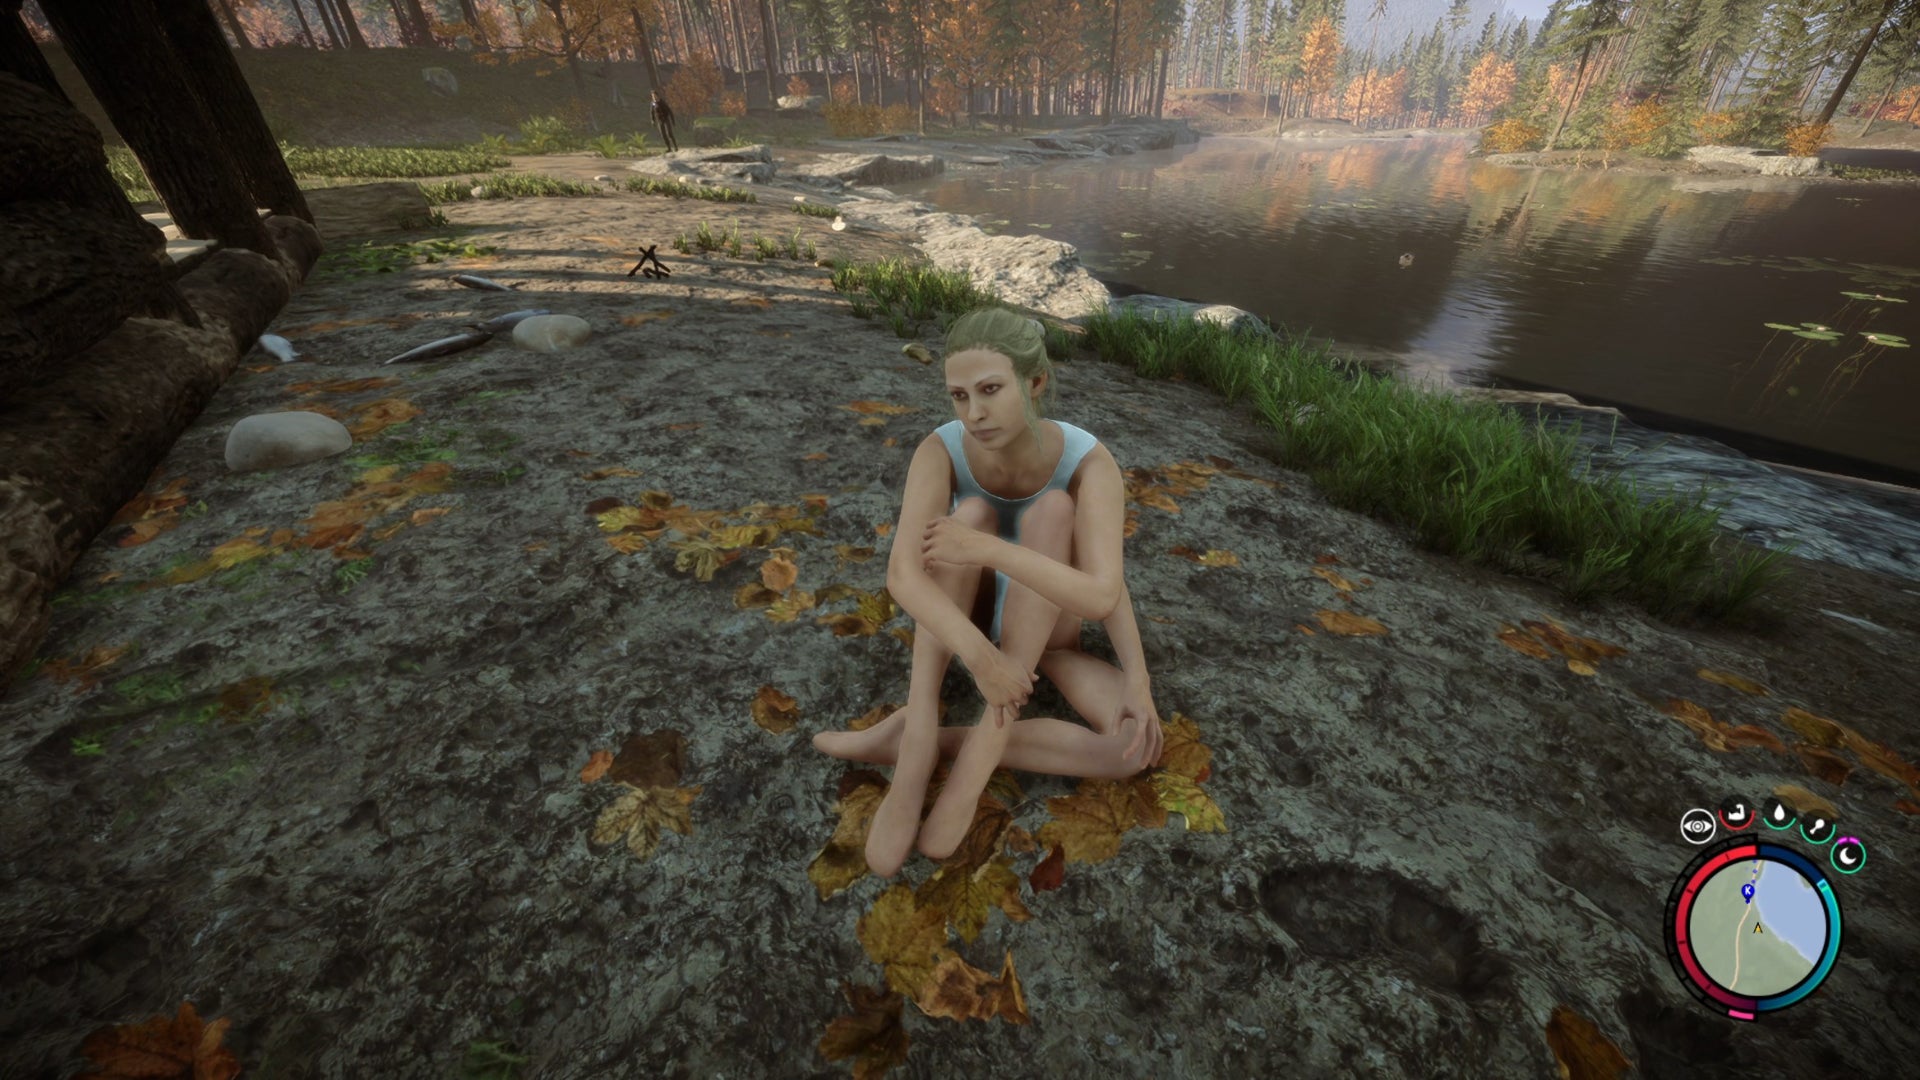 Virginia, an NPC companion in Sons Of The Forest, sits down next to a river and looks up at the player camera.